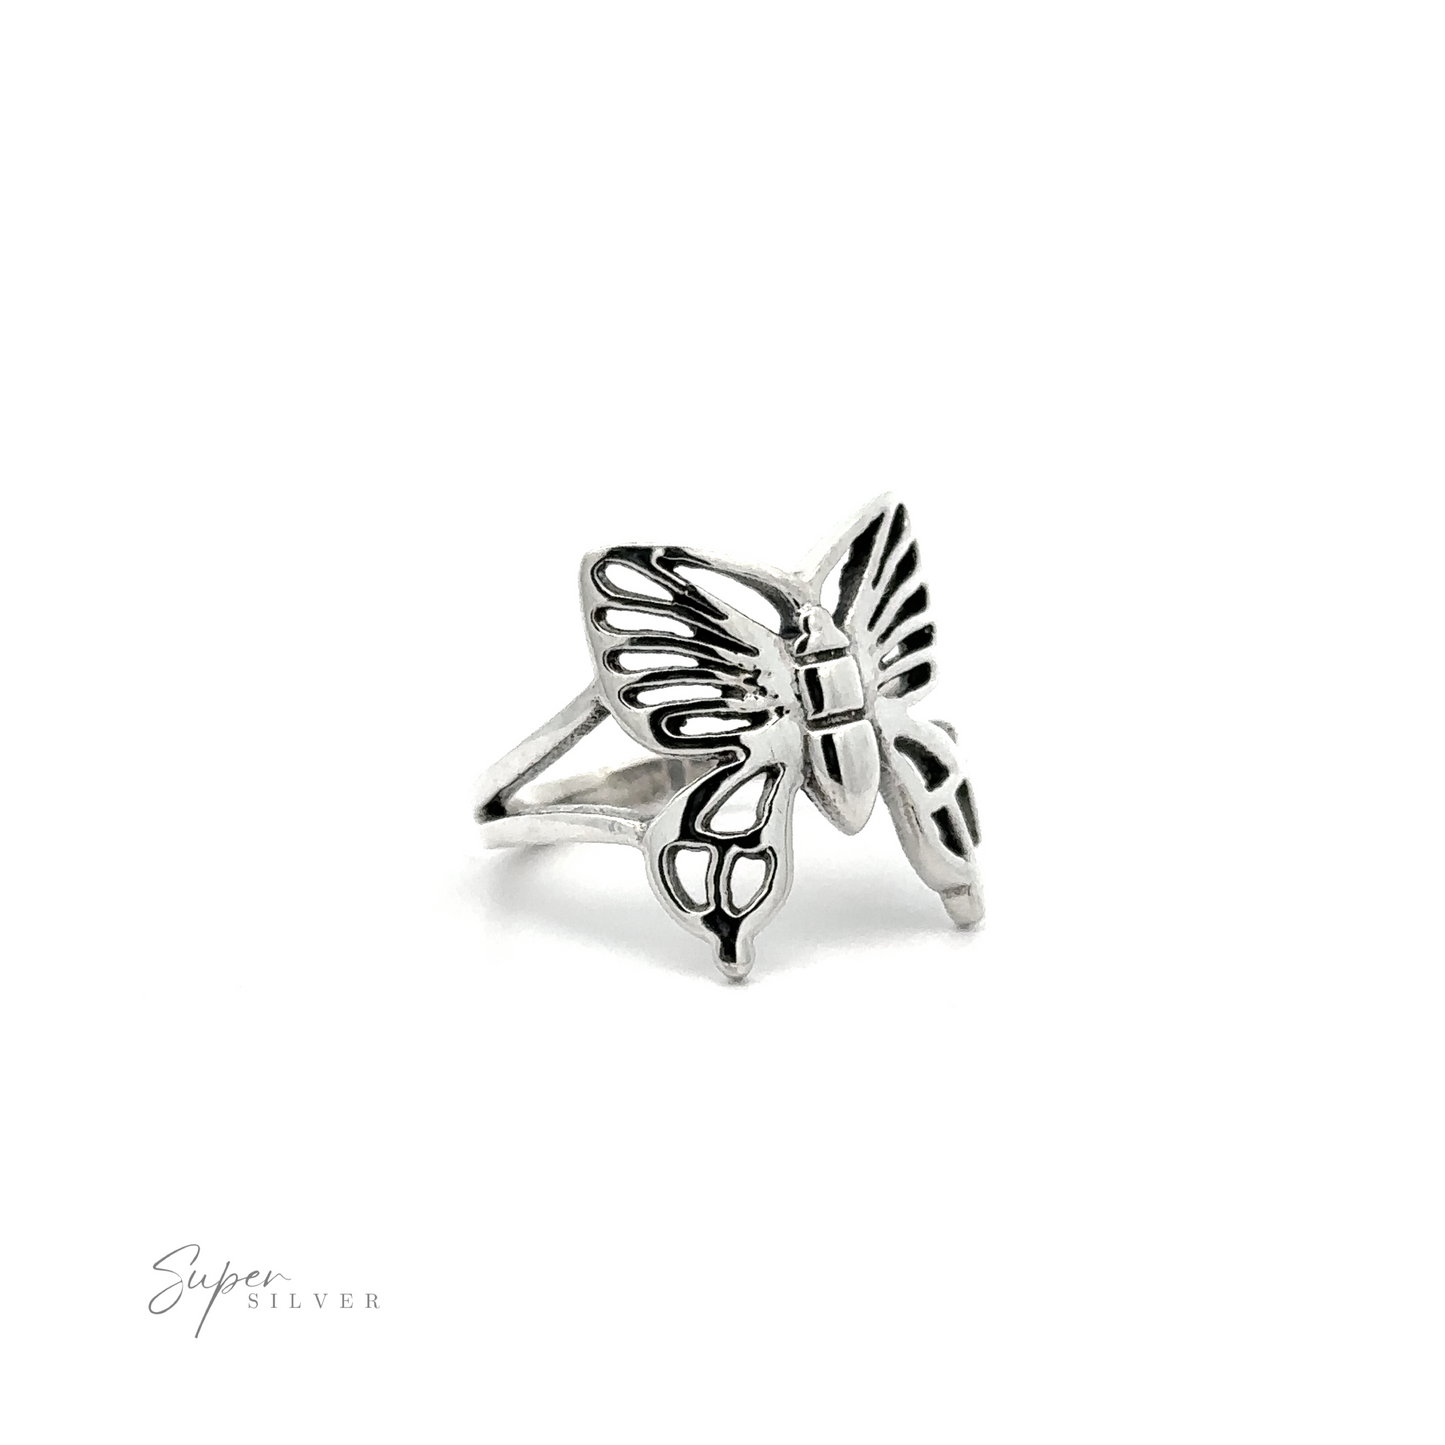 A Sterling Silver Butterfly Ring on a white background.